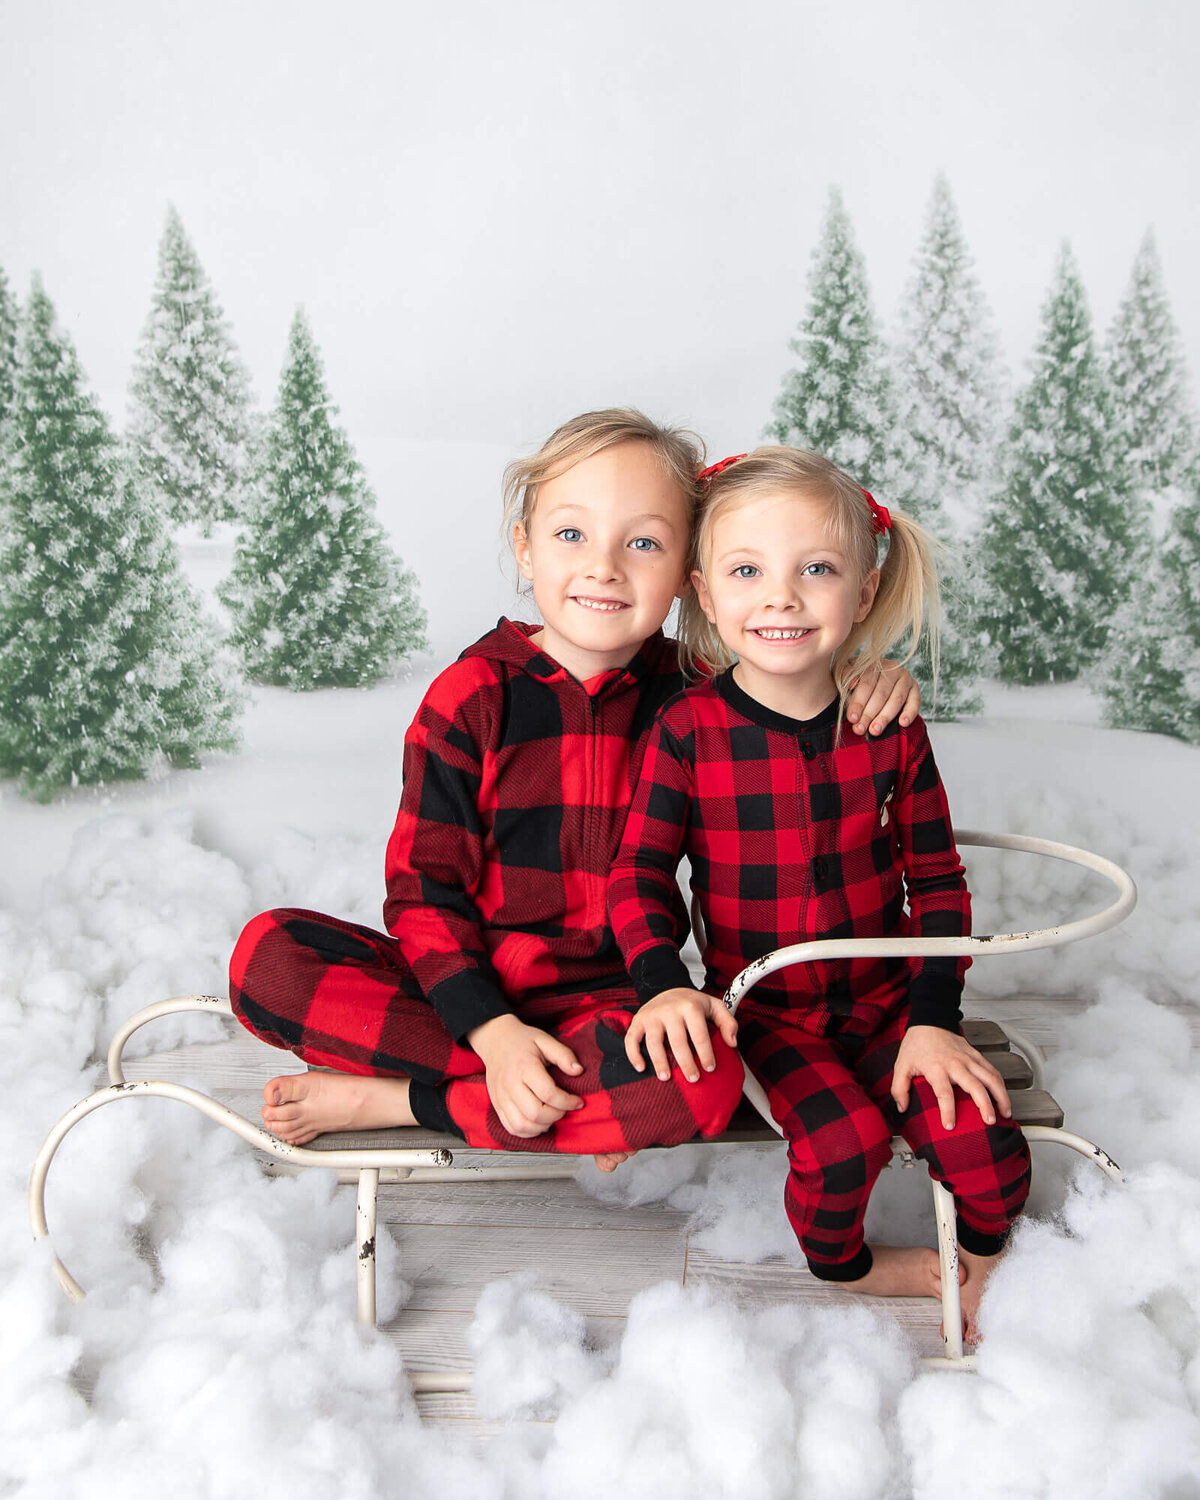 christmas card picture, boy and girl sitting on a sled